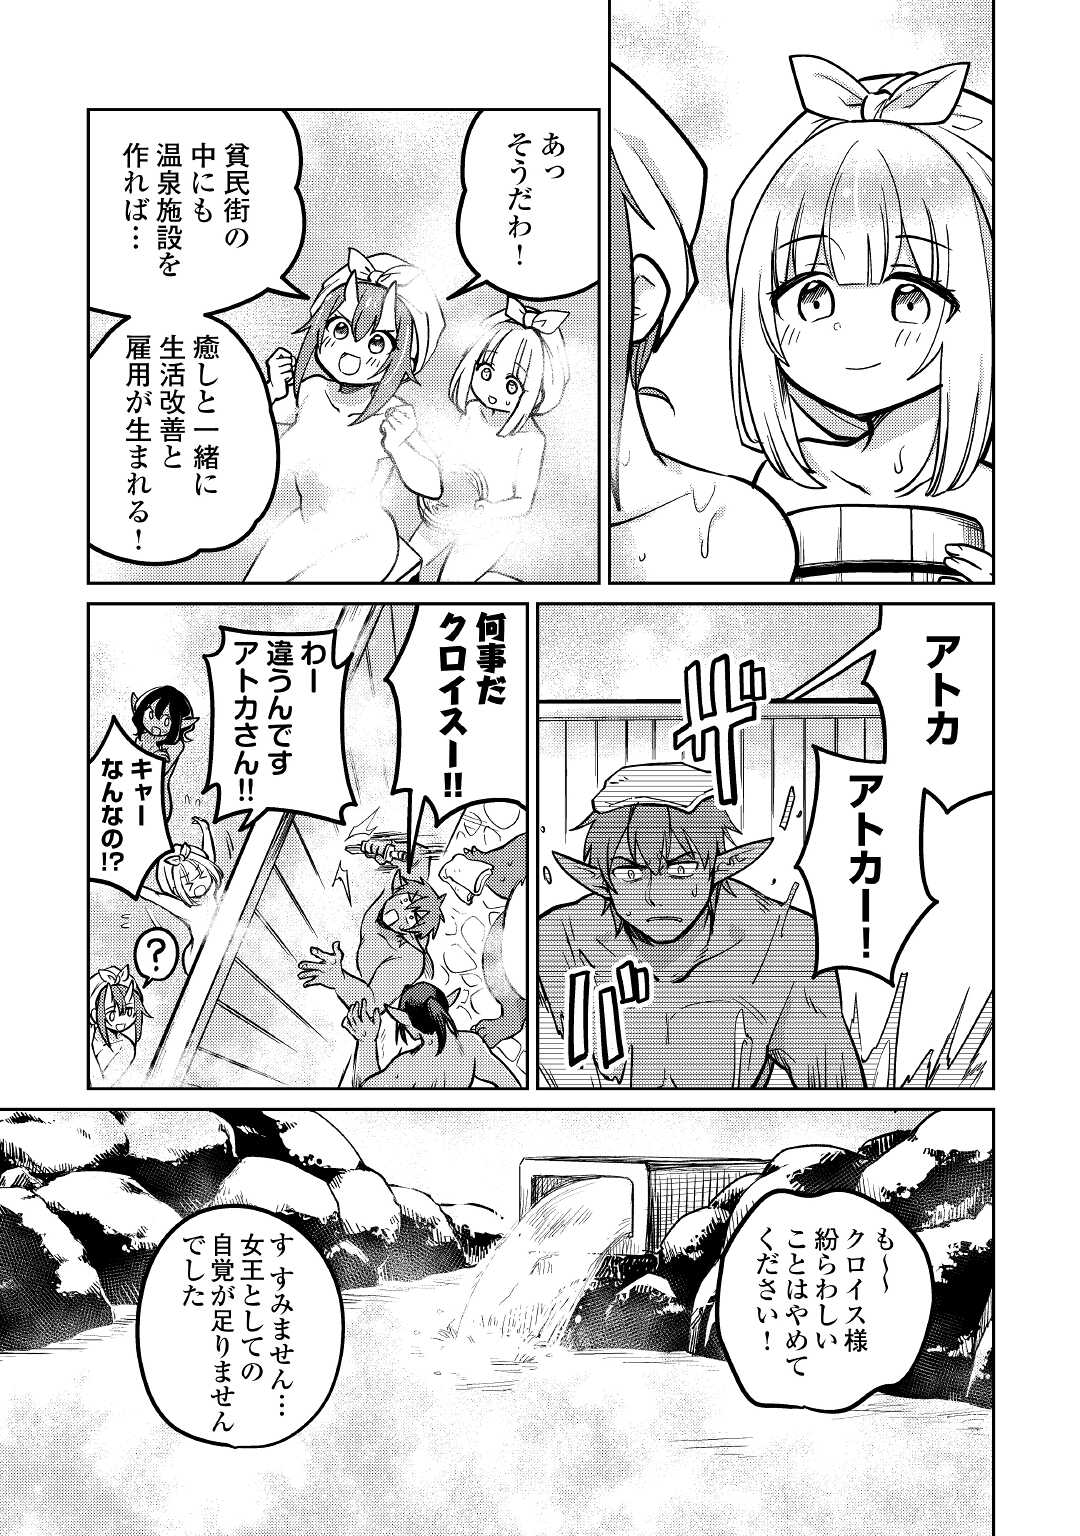 The Former Structural Researcher’s Story of Otherworldly Adventure 第41話 - Page 5